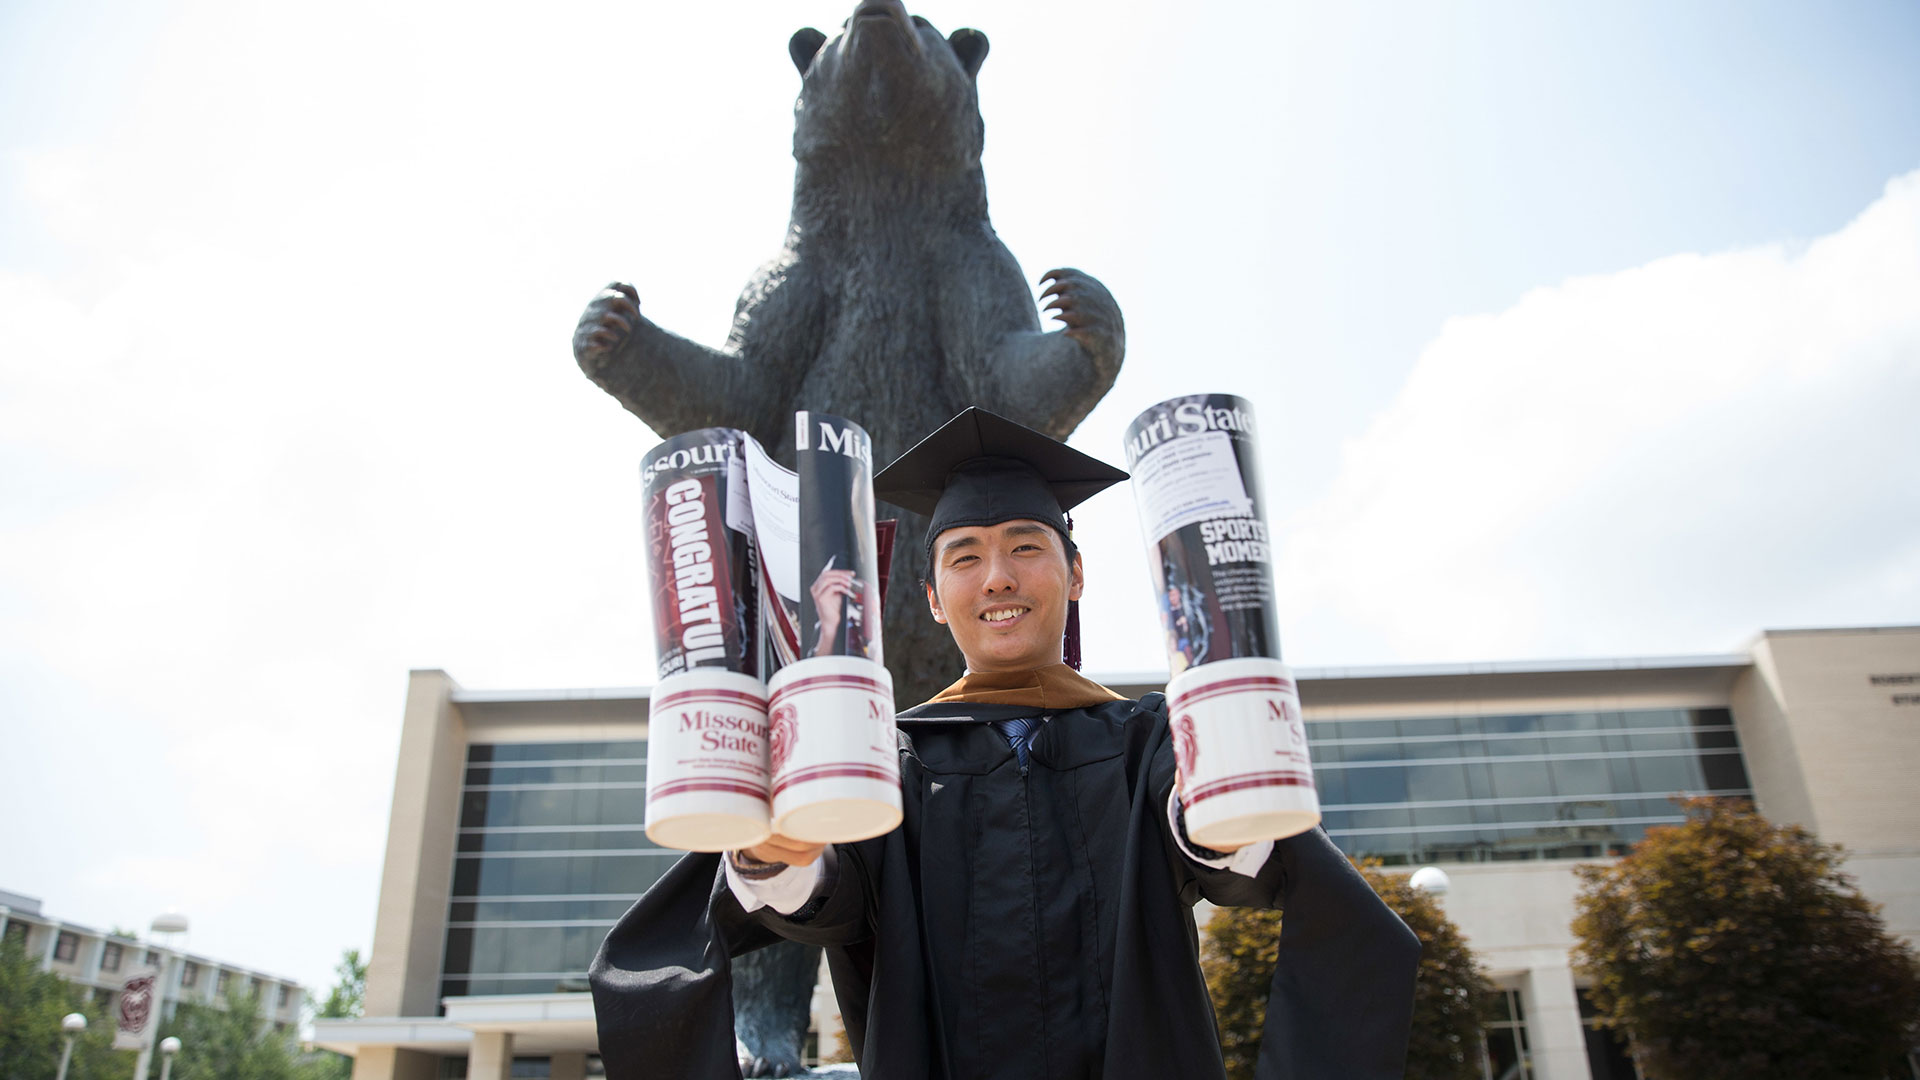 Missouri State graduate in cap and gown, holding up swag in front of bear statue. 